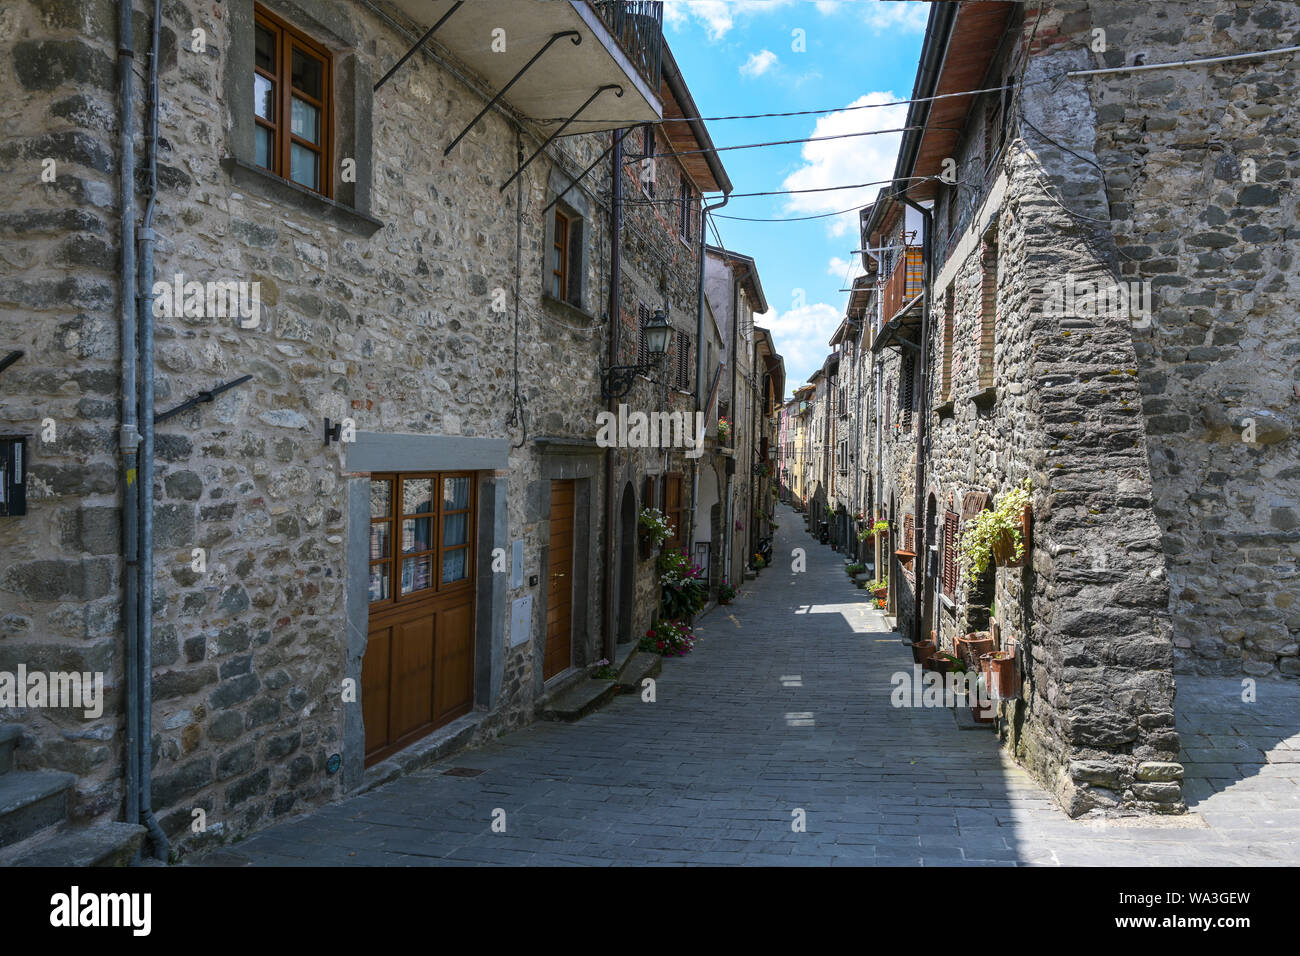 Narrow alley  with houses from field stones in Virgoletta, a beautiful ancient mountain village, district of Villafranca in Lunigiana, Tuscany, Italy Stock Photo